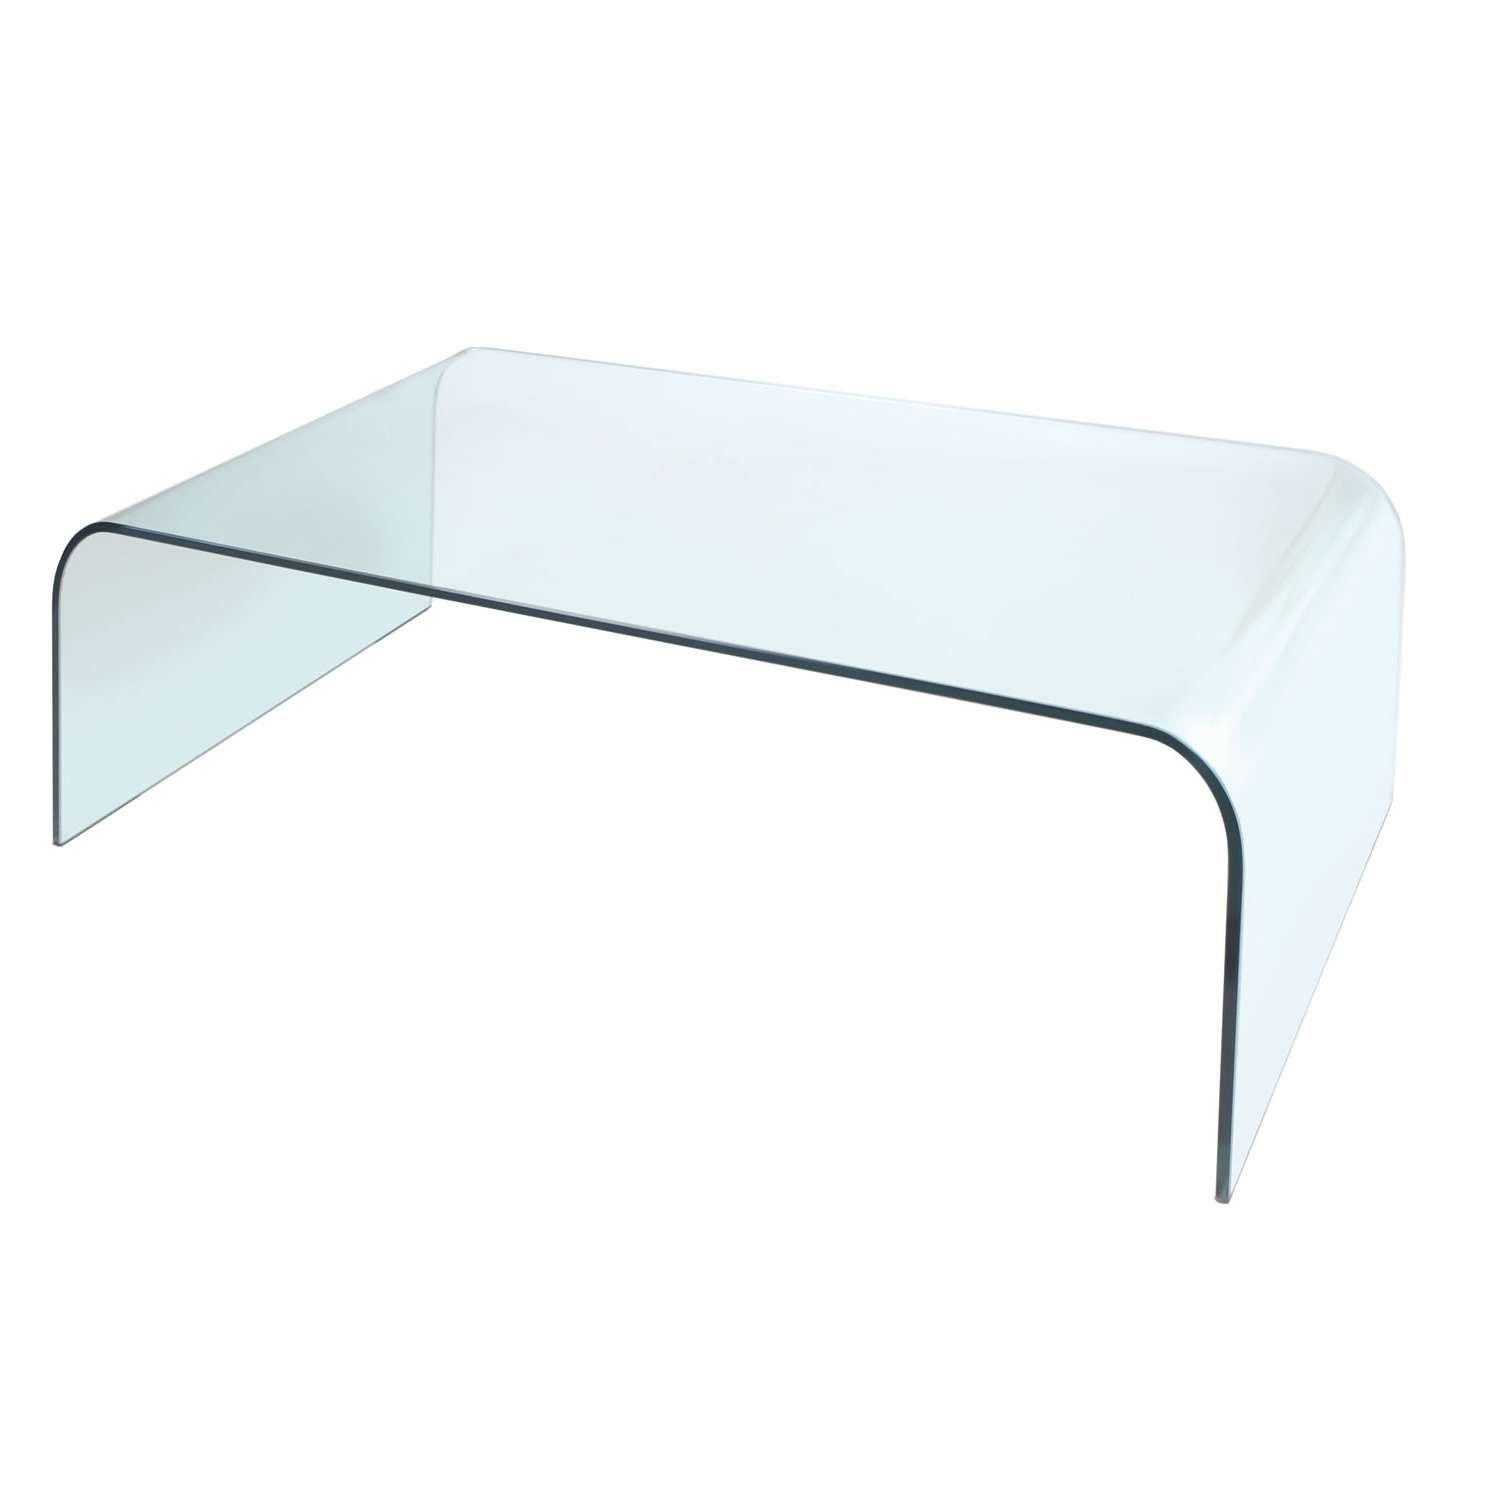 Curved Glass Coffee Tables Lovely White Curved Glass Coffee Table With Regard To Popular Curved Glass Coffee Tables (View 5 of 20)